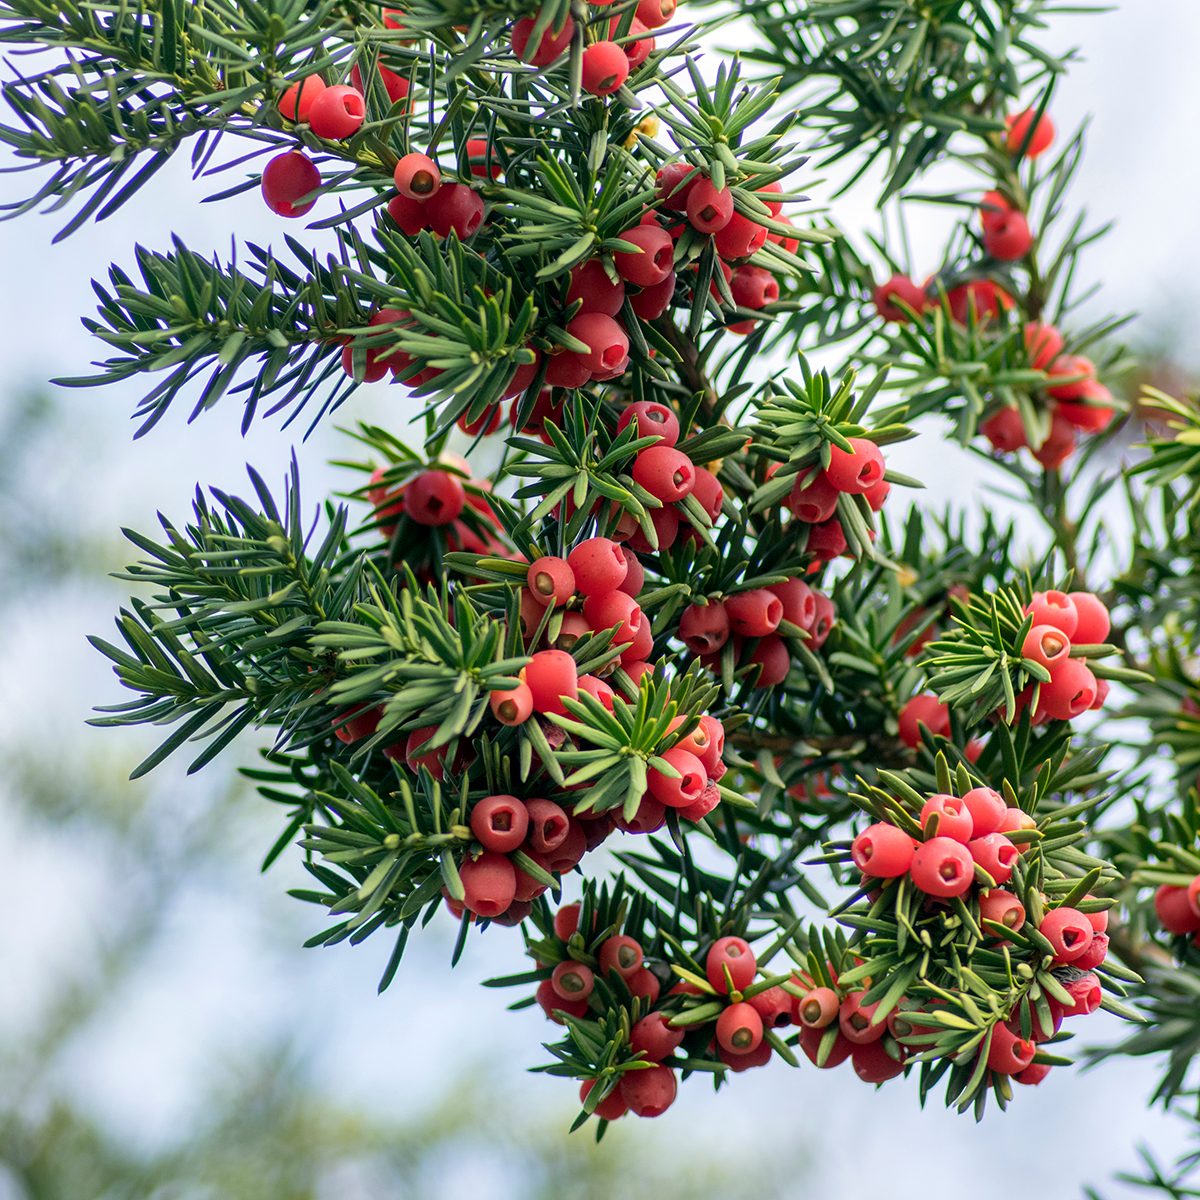 Taxus baccata European yew is conifer shrub with poisonous and bitter red ripened berry fruits on branches against light blue sky